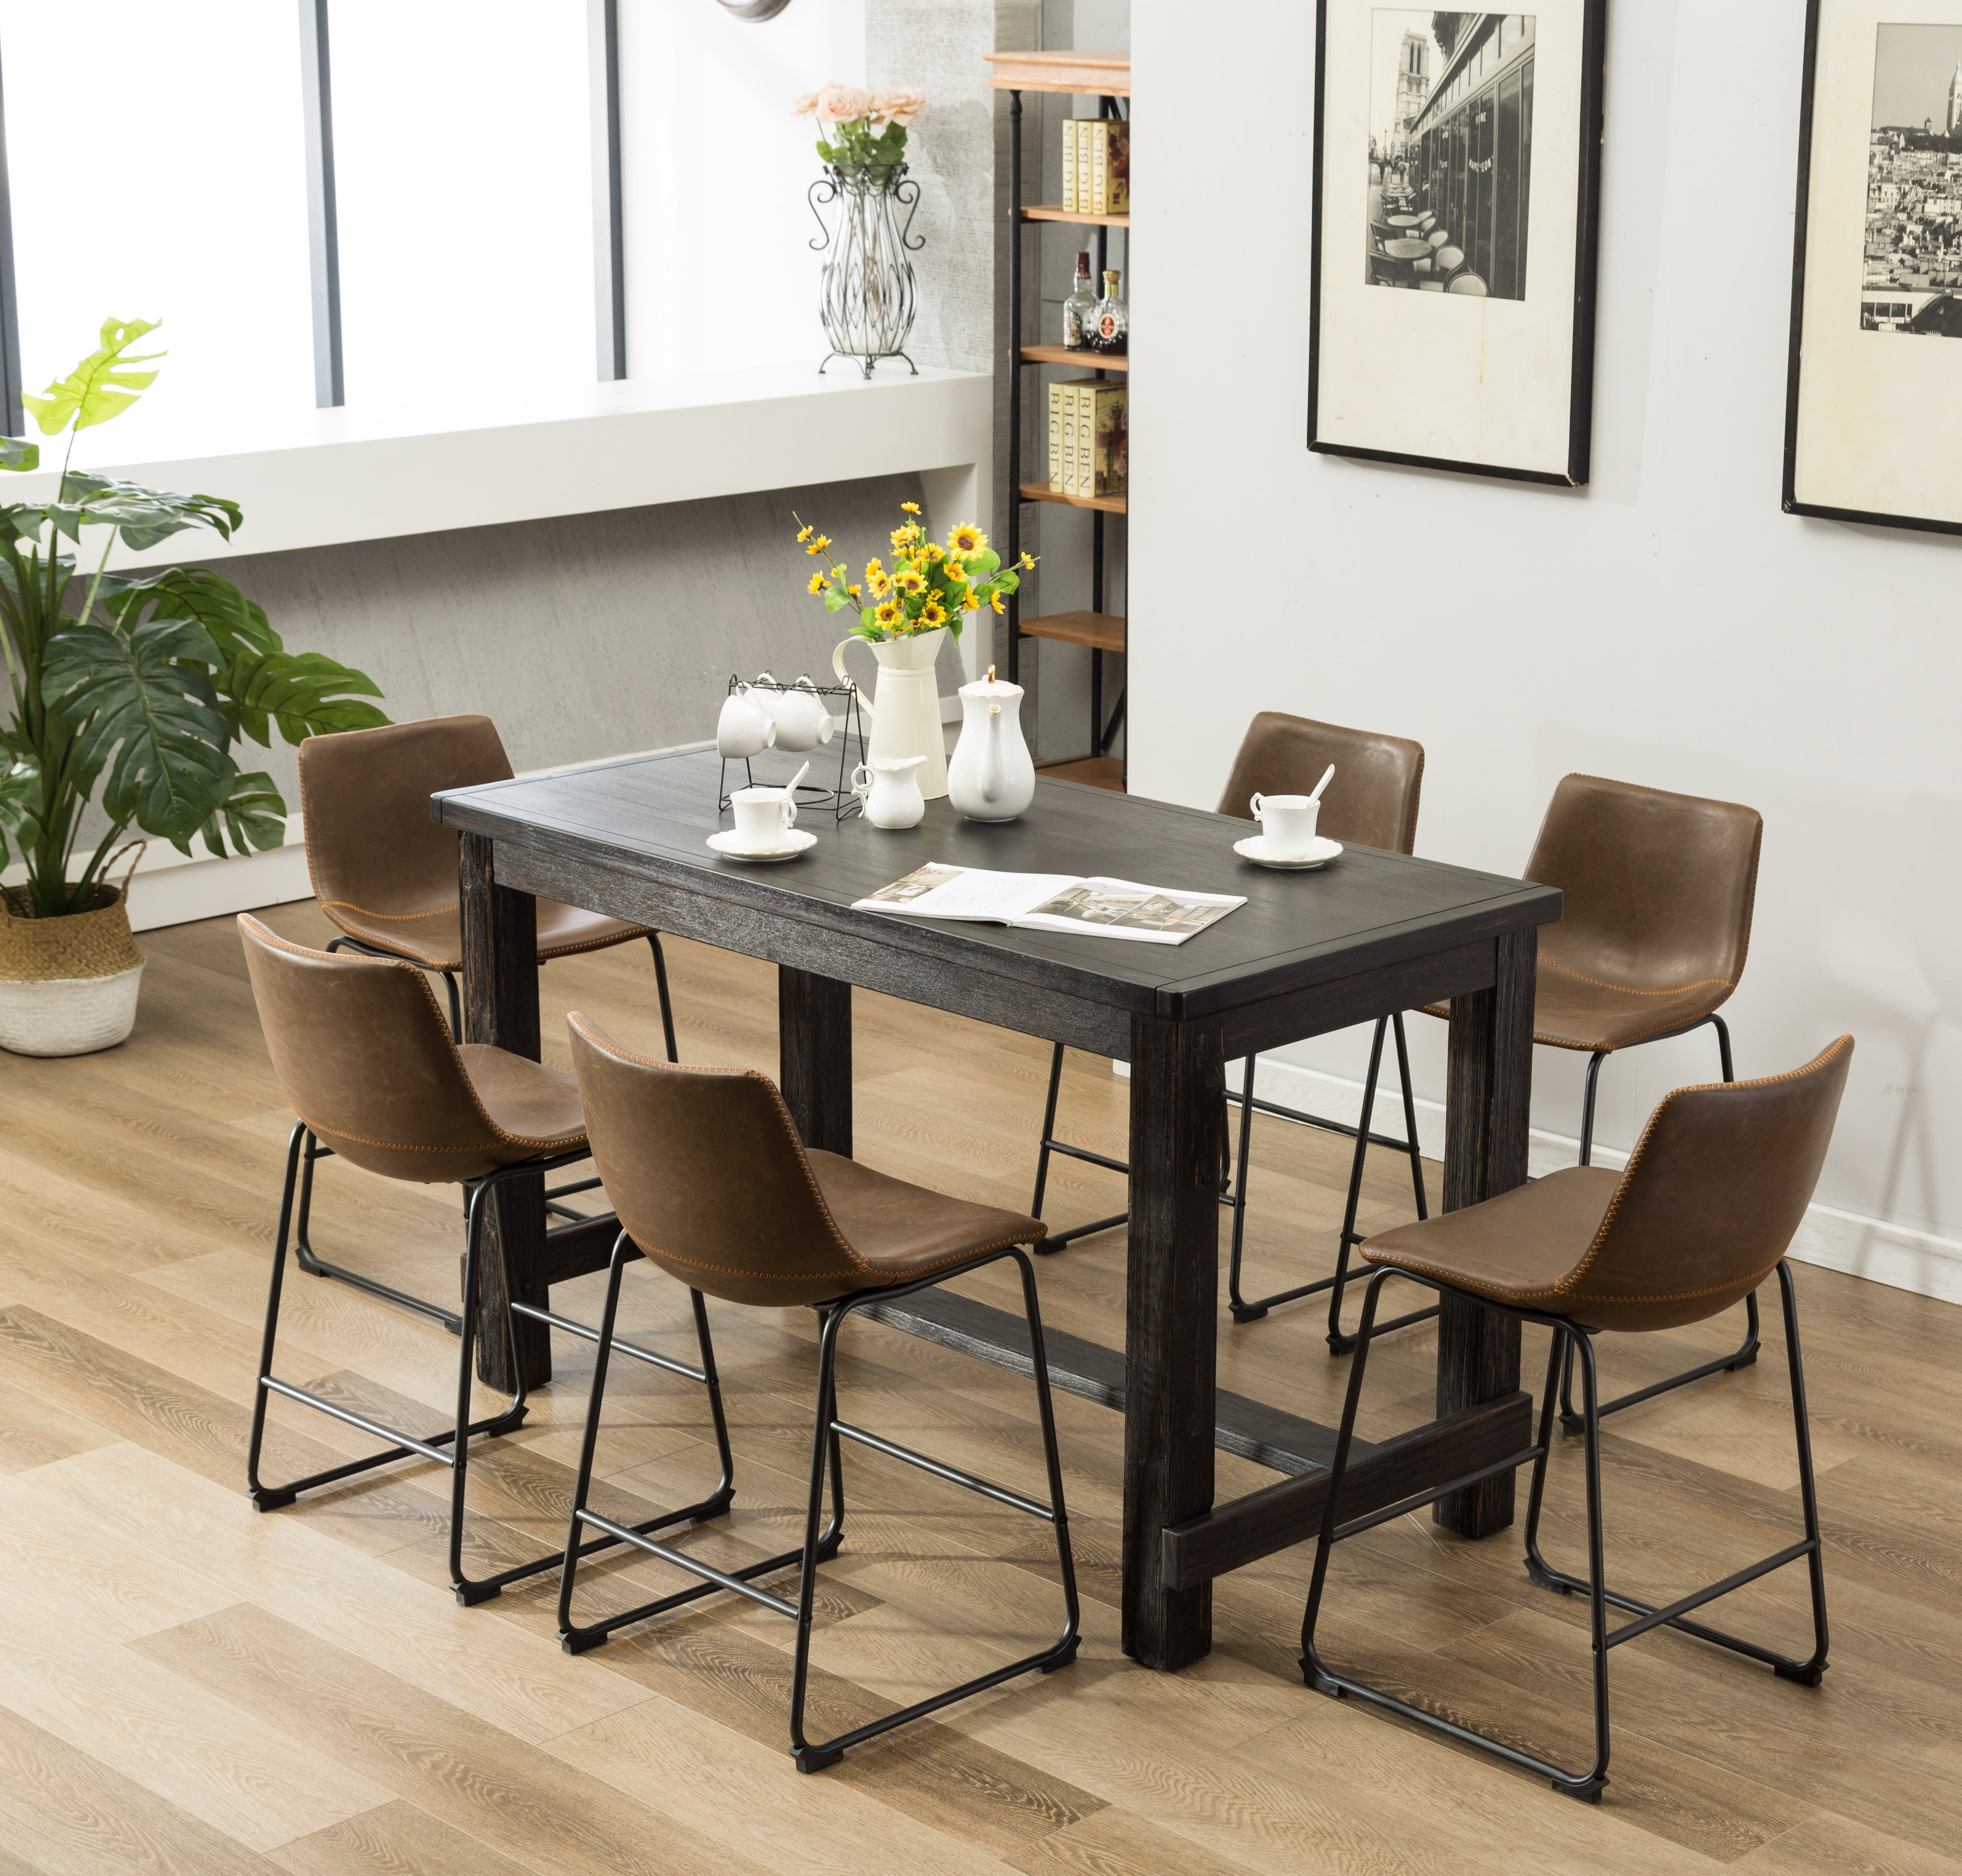 Roundhill Lotusville 7 Piece Counter, Dining Room Table With Brown Leather Chairs